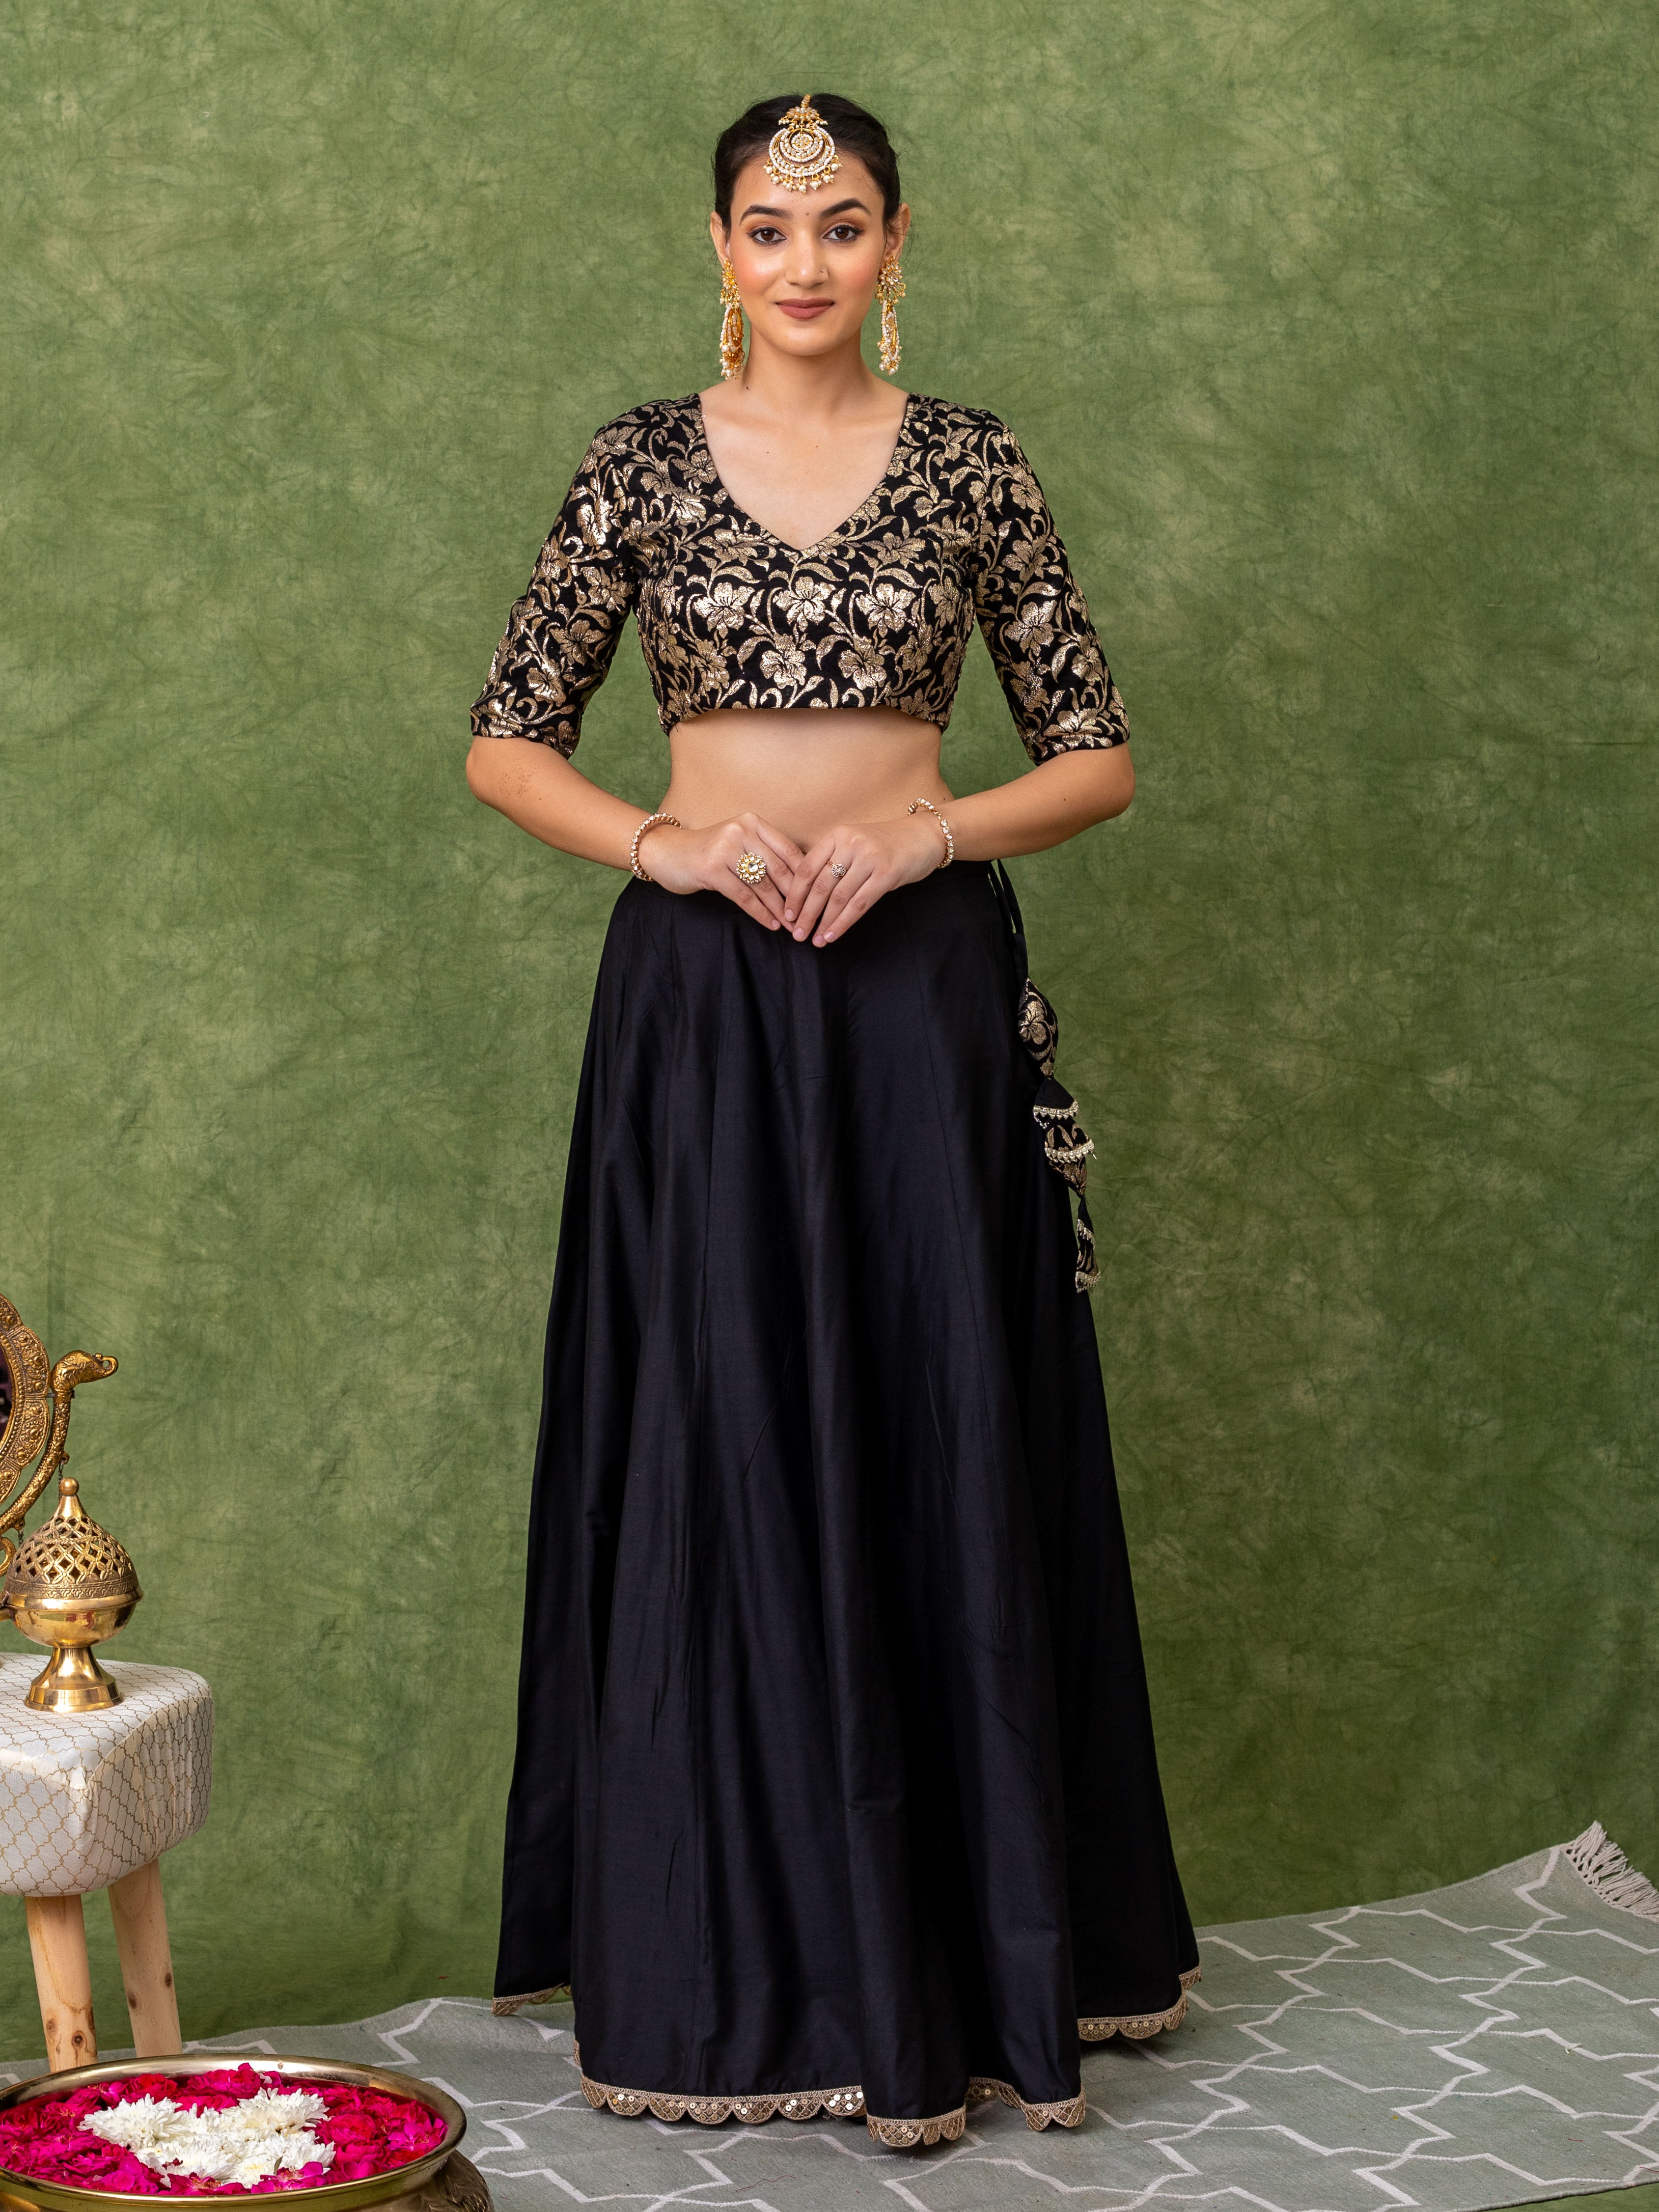 Lehenga set in black with floral Jacquard jaal on the blouse